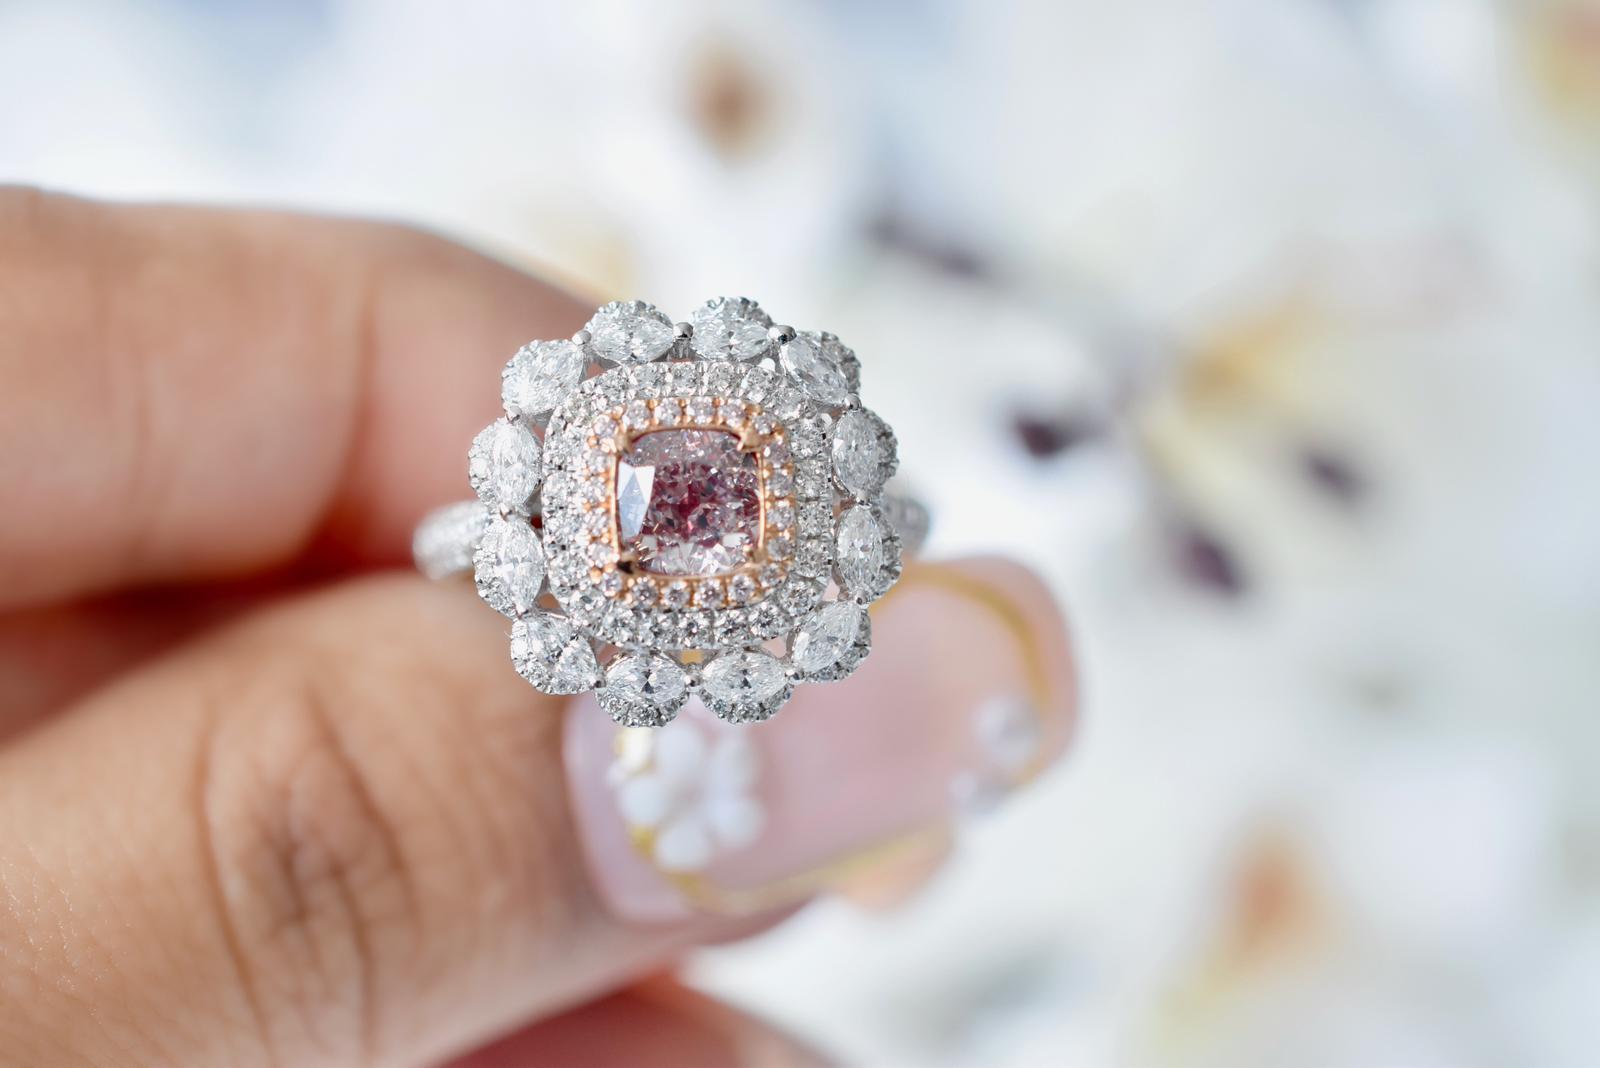 **100% NATURAL FANCY COLOUR DIAMOND JEWELLERIES**

✪ Jewelry Details ✪

♦ MAIN STONE DETAILS

➛ Stone Shape: Cushion
➛ Stone Color: Fancy Light Pinkish Brown
➛ Stone Weight: 0.83 carats
➛ GIA certified

♦ SIDE STONE DETAILS

➛ Side marquise diamonds